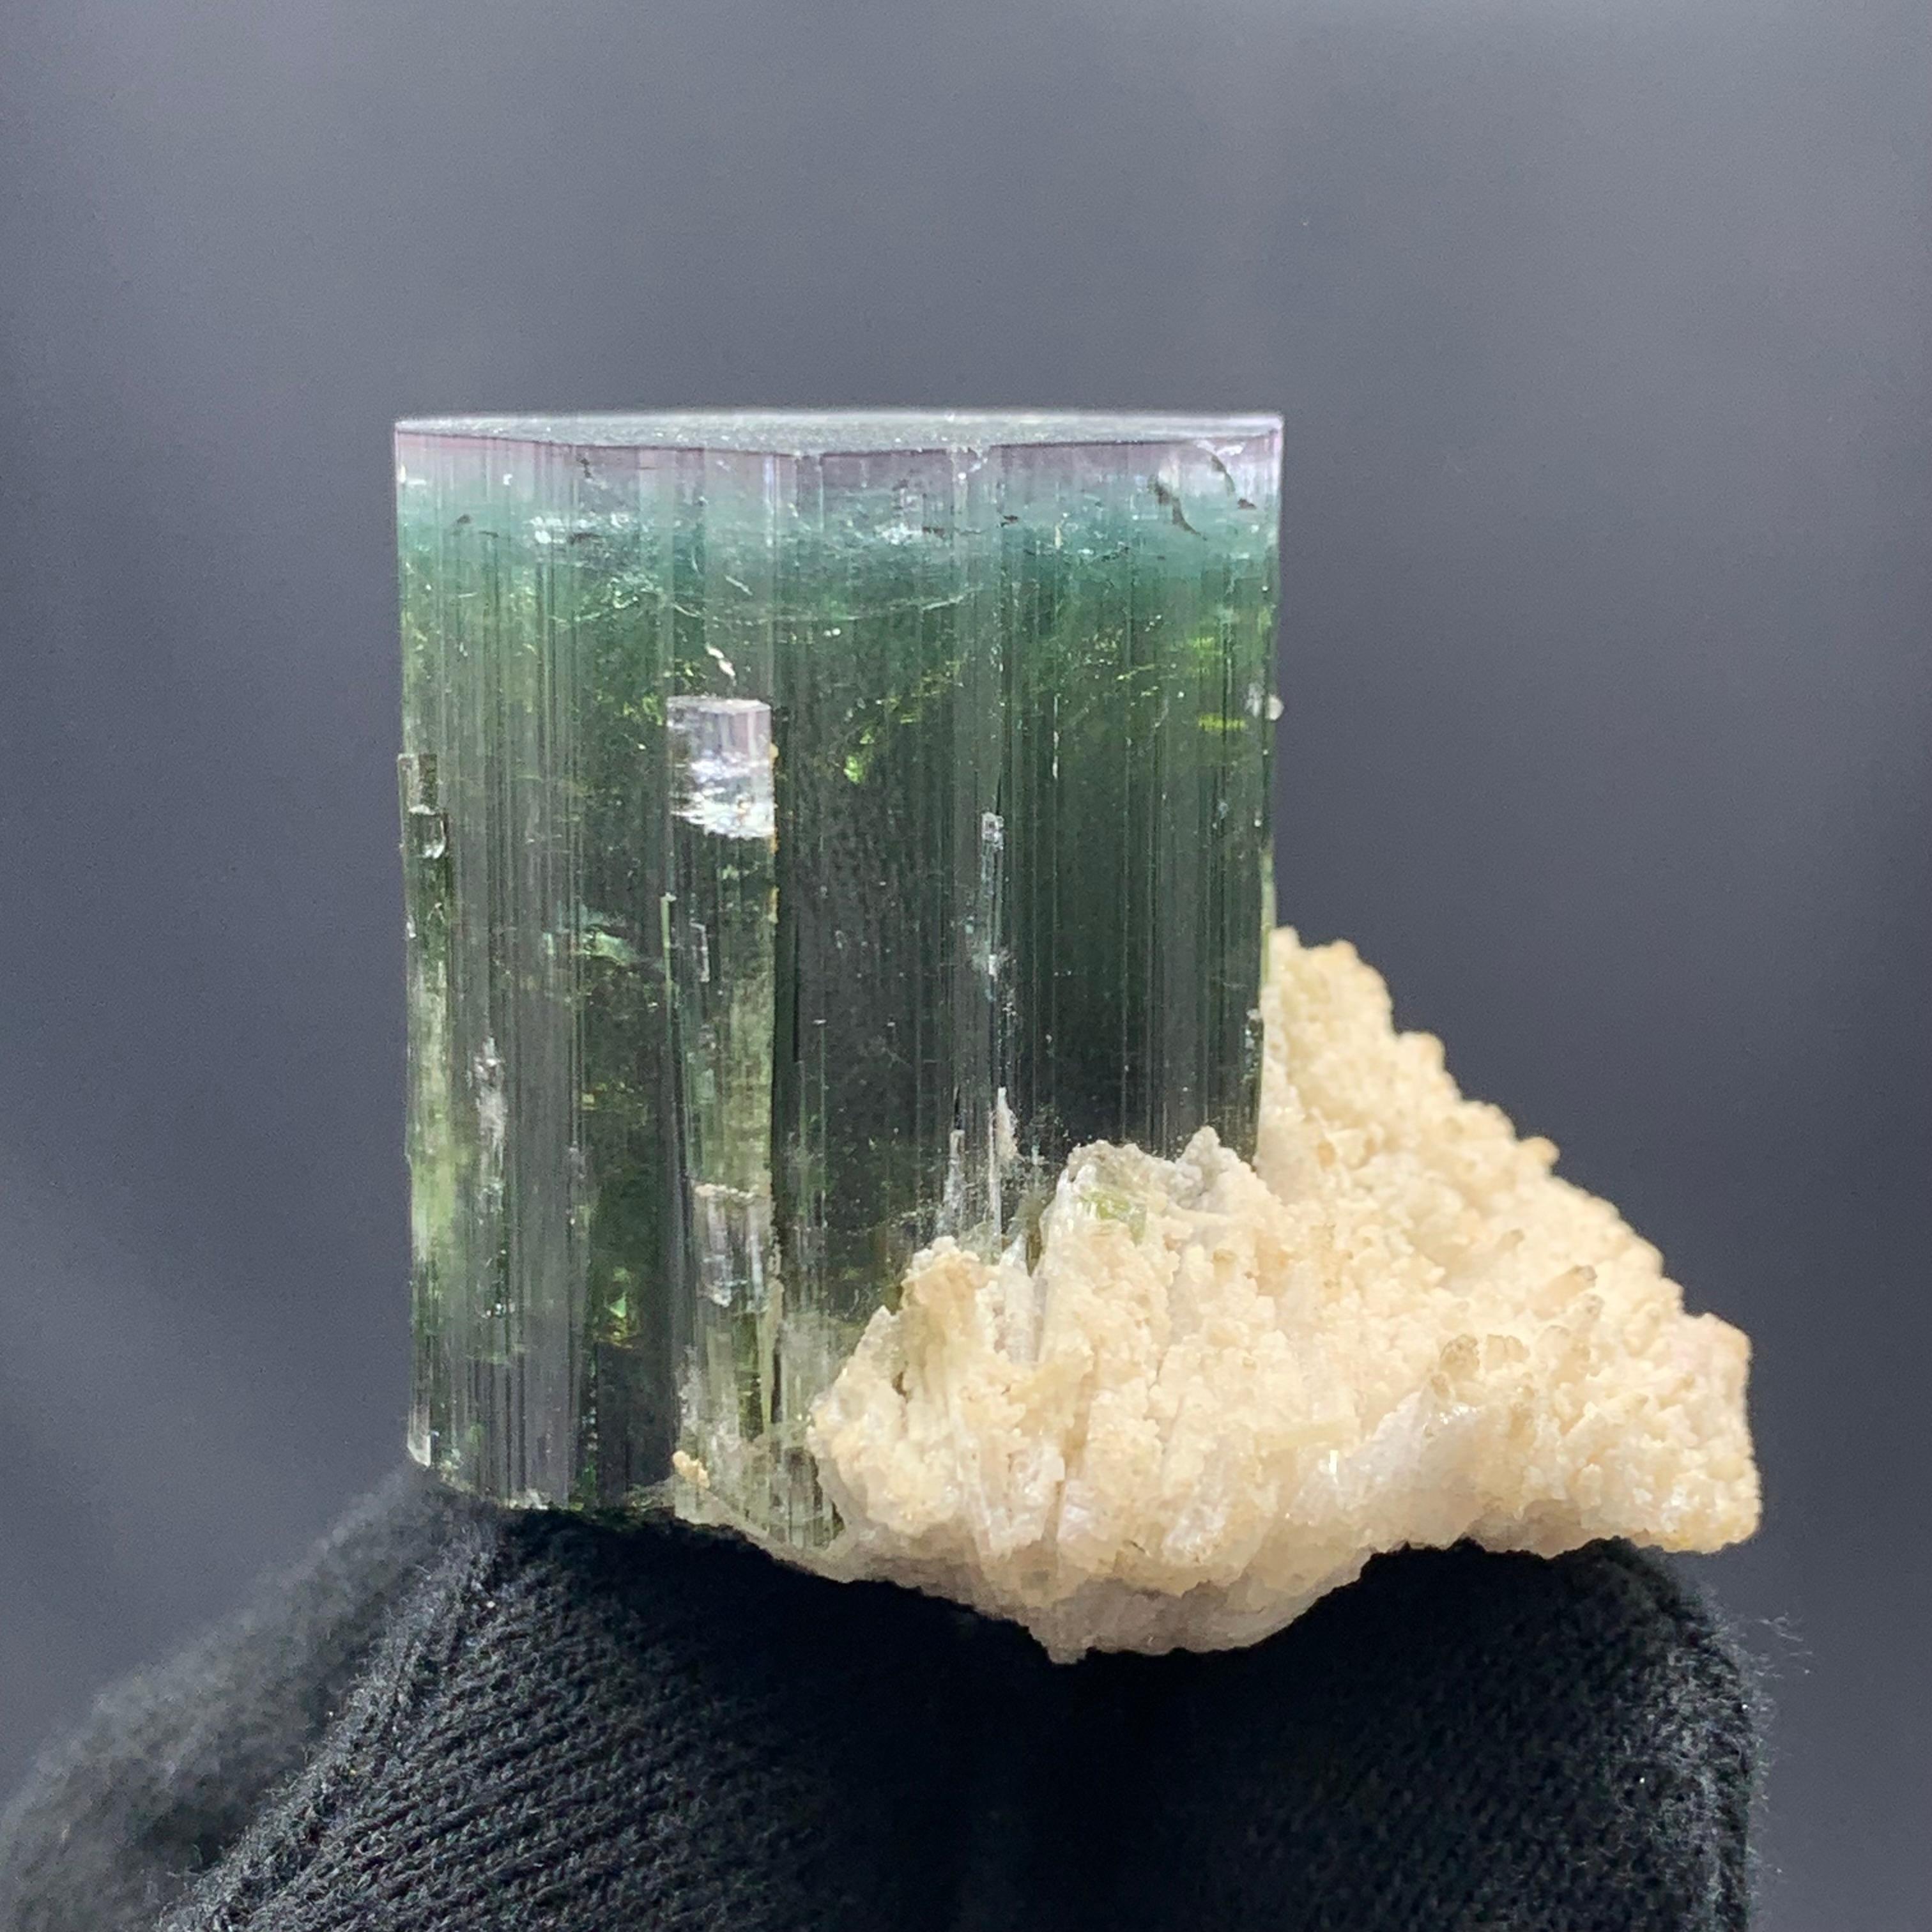 86.97 Gram Pink Cap Green Tourmaline Specimen From Kunar, Afghanistan 

Weight: 86.97 Gram 
Dimension: 4.2 x 4.6 x 3.6 Cm
Origin: Kunar, Afghanistan 

Tourmaline is a crystalline silicate mineral group in which boron is compounded with elements such